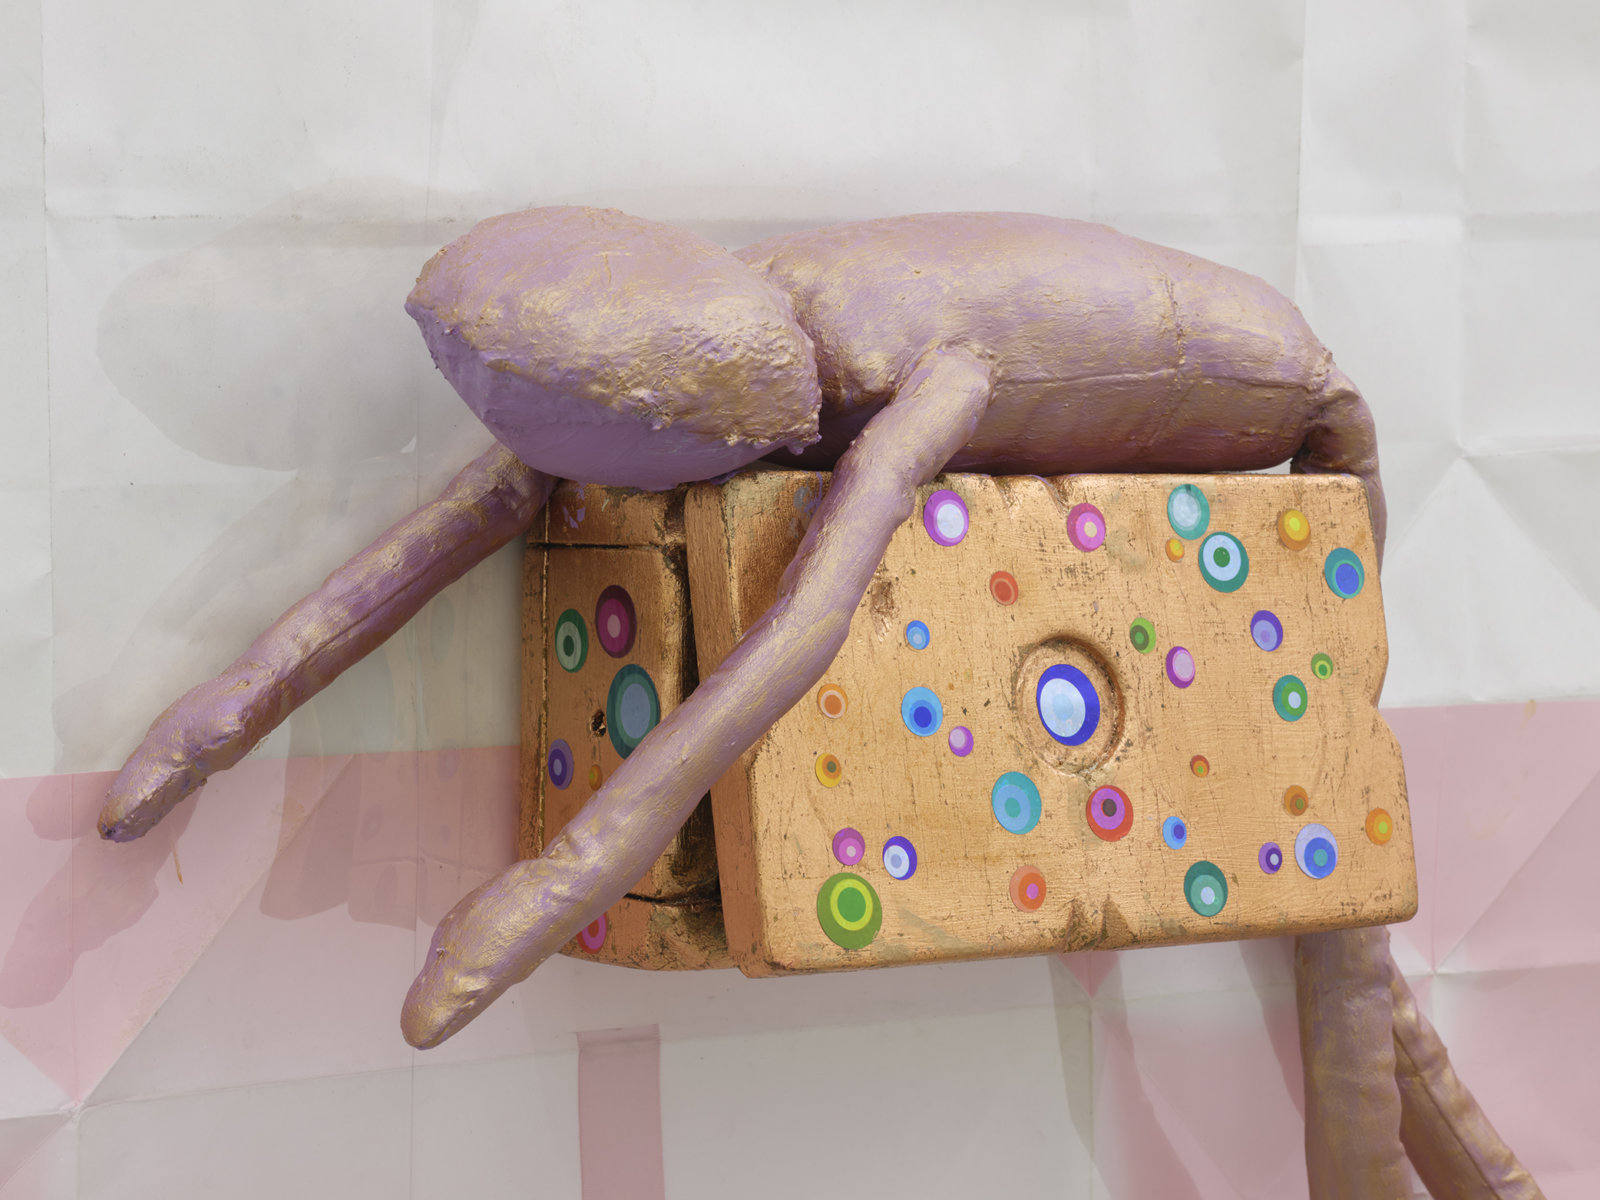 Liz Magor, Gold Box (detail), 2020, painted doll, jewellery box, packaging materials, 42 x 48 x 5 in. (107 x 122 x 13 cm)